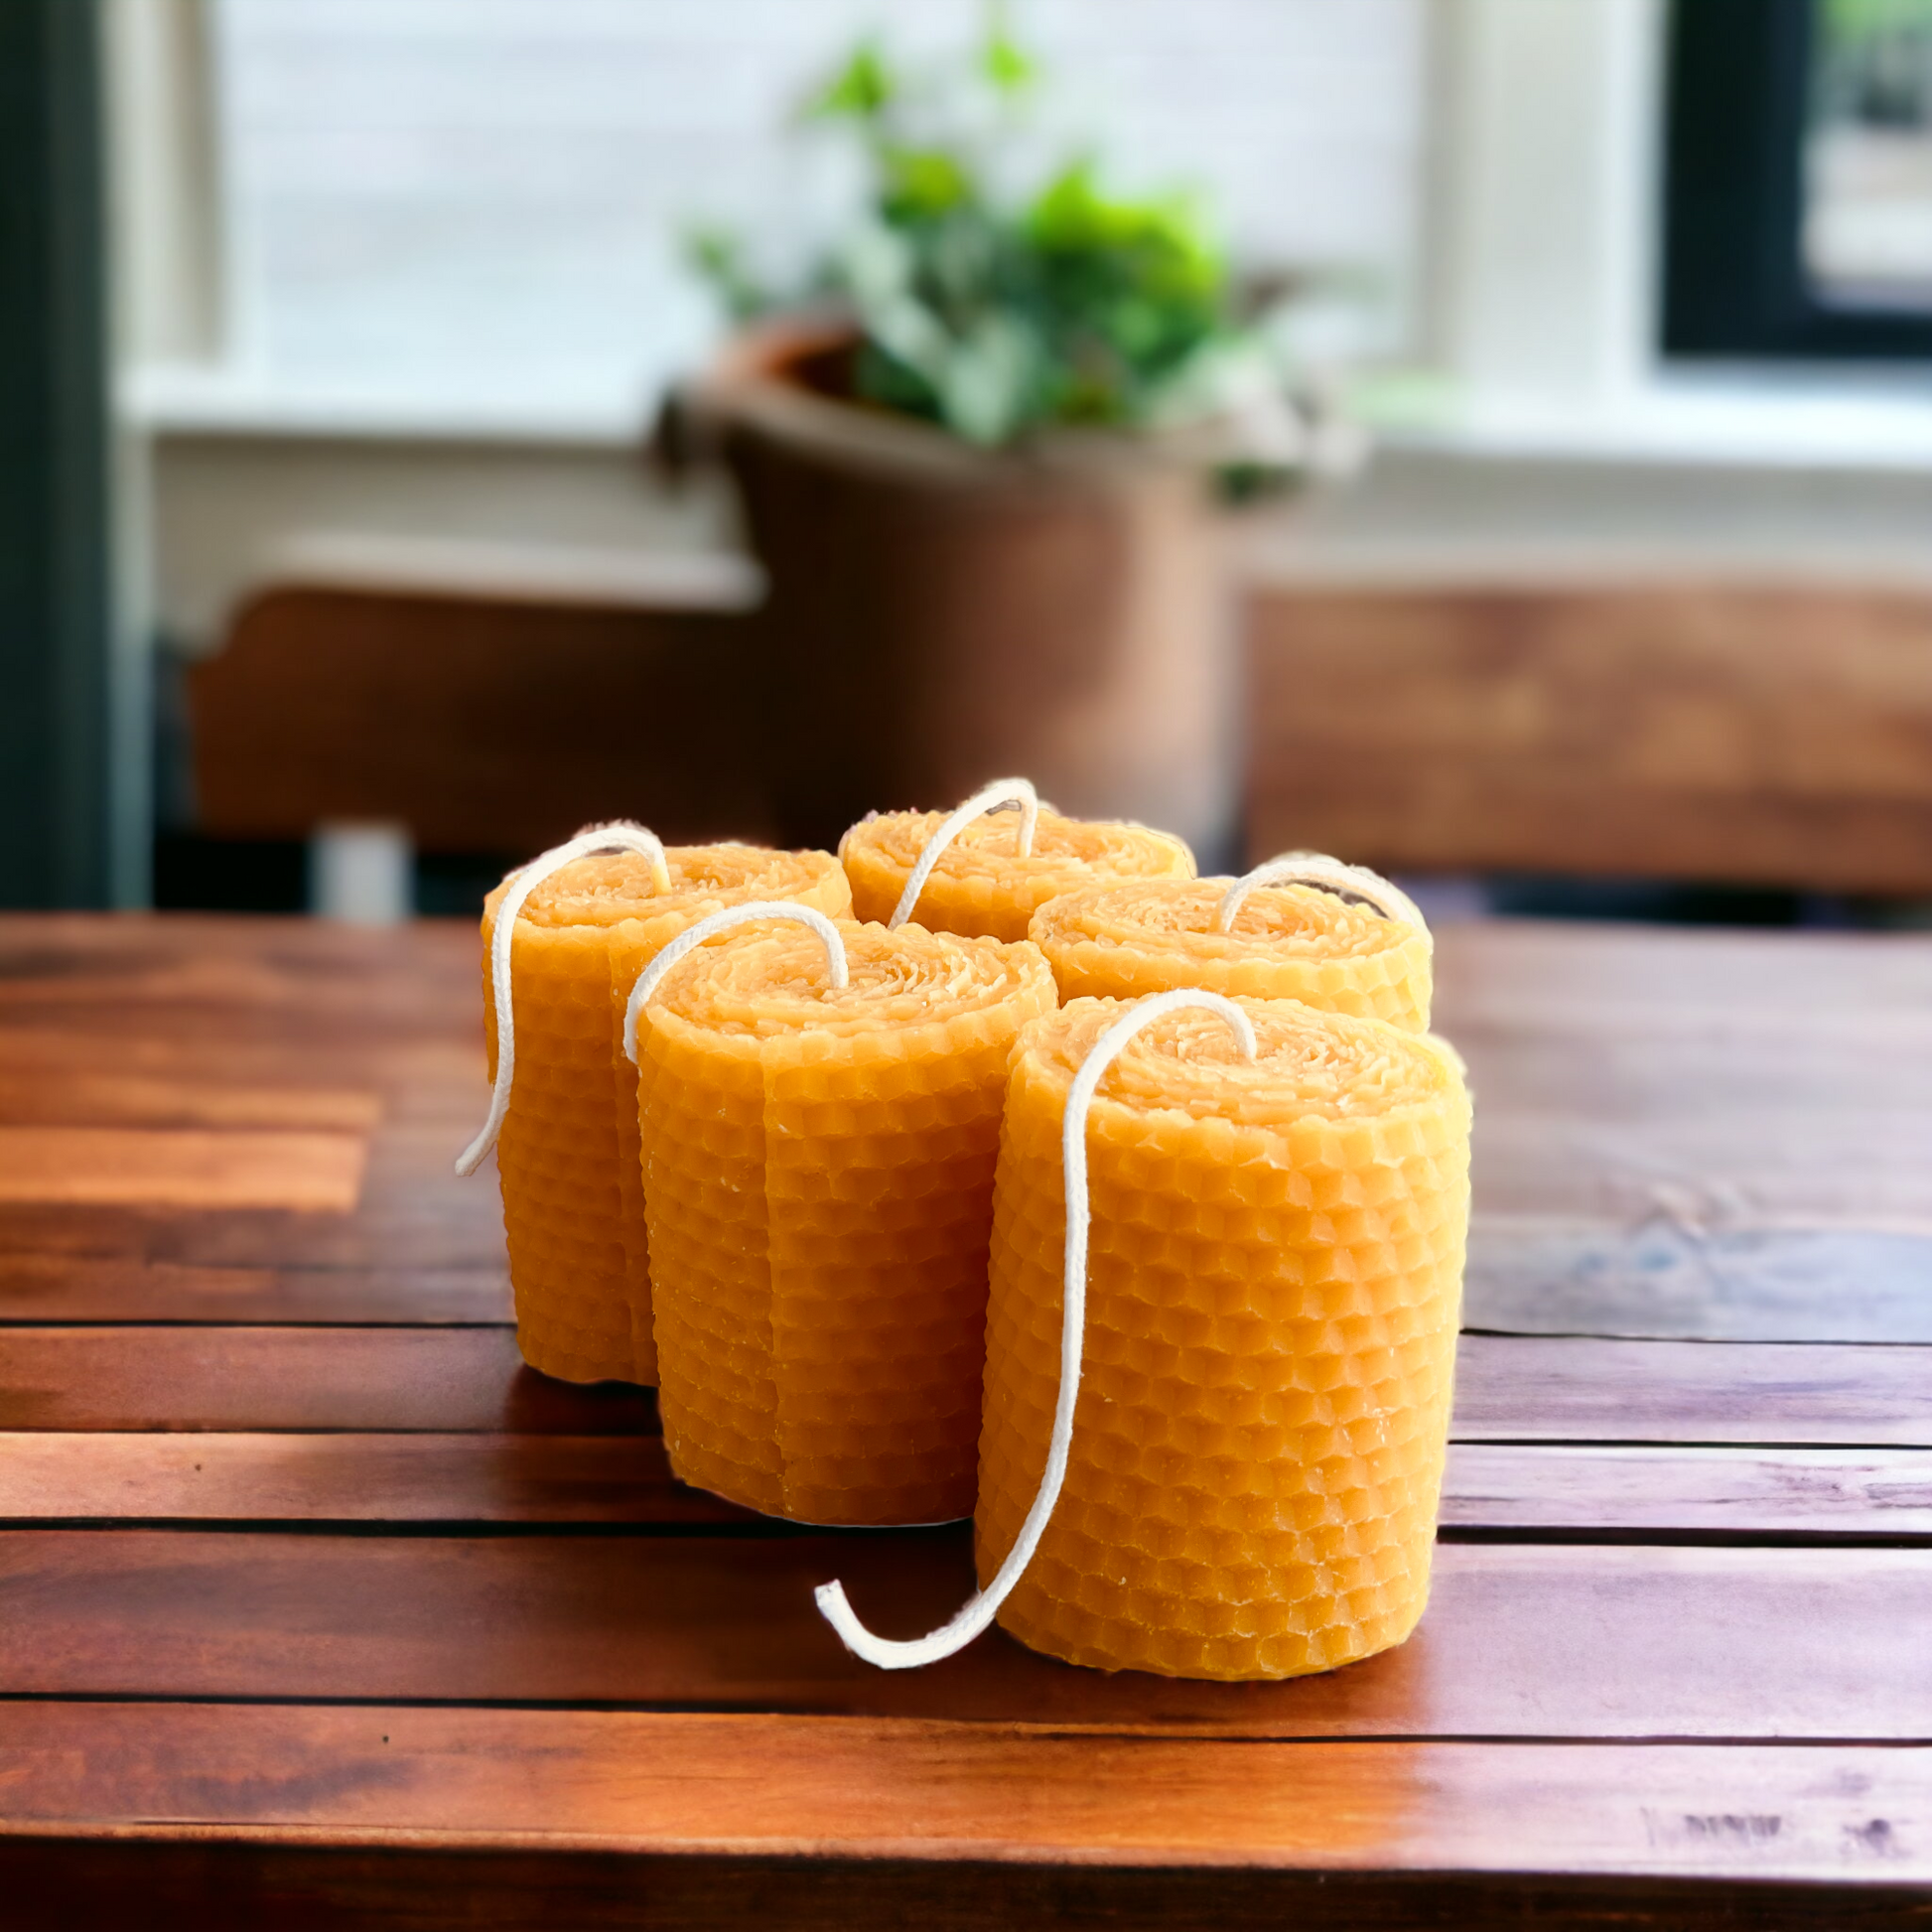 4 Pure Beeswax Rolled Pillar Candle